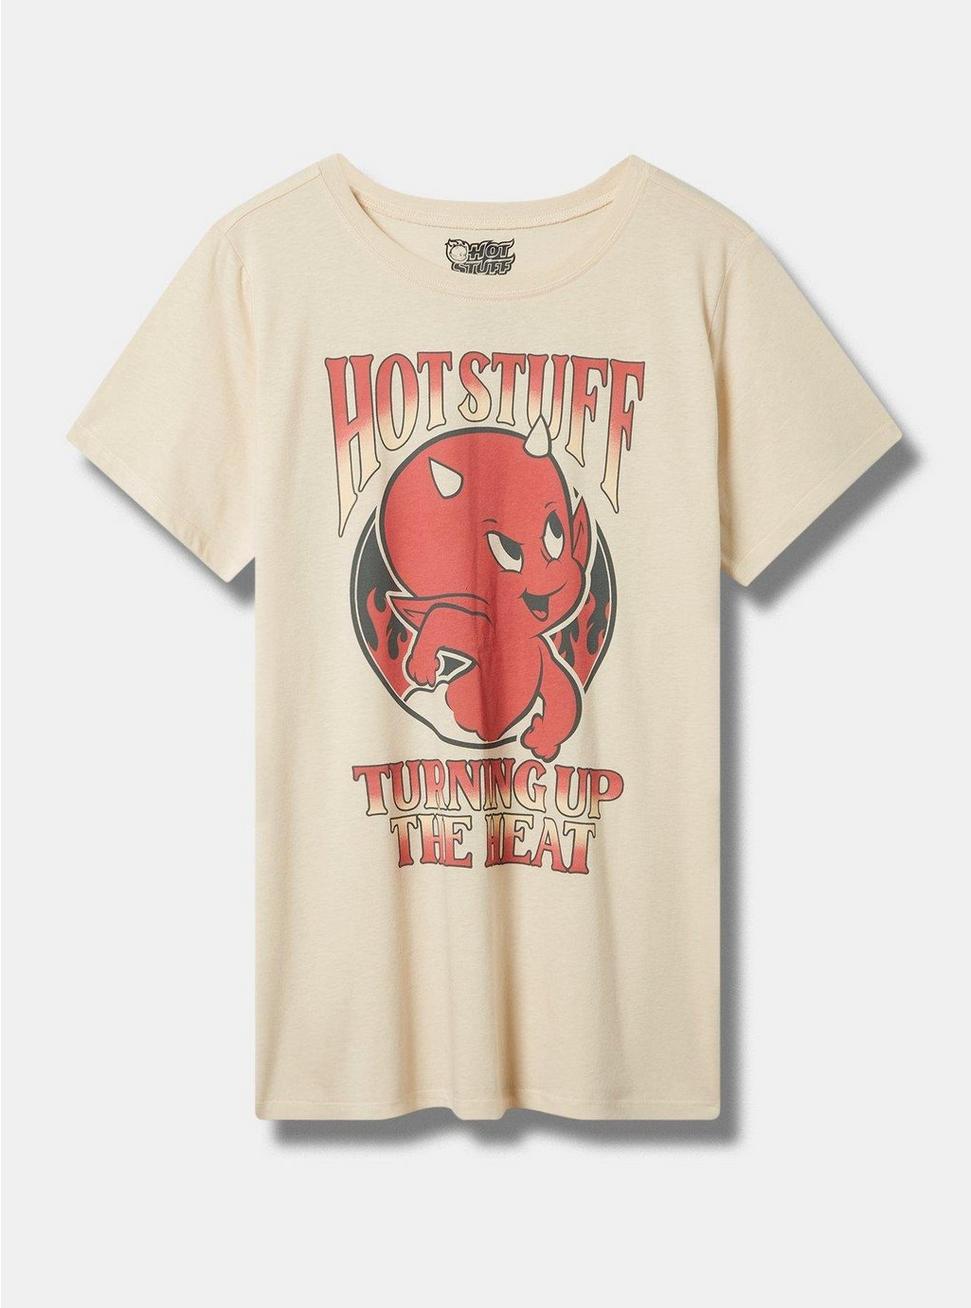 Hot Stuff Classic Fit Cotton Crew Tee, FROSTED ALMOND, hi-res